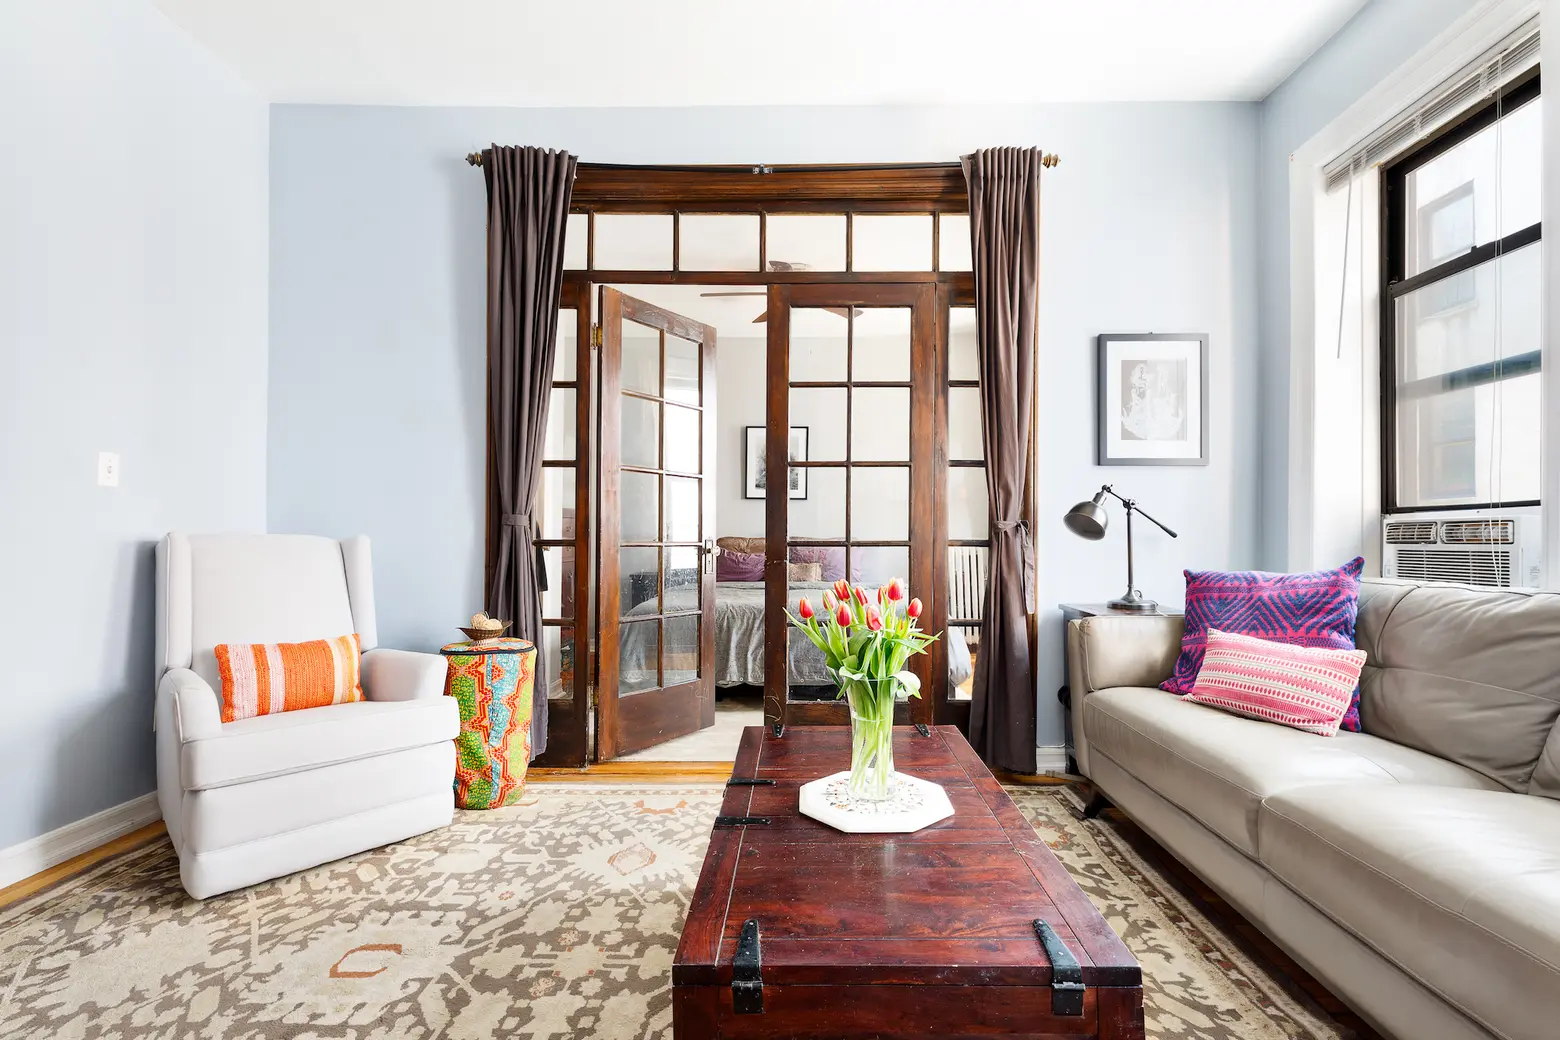 This two-bedroom Washington Heights co-op has space and good looks for a budget-friendly $400K